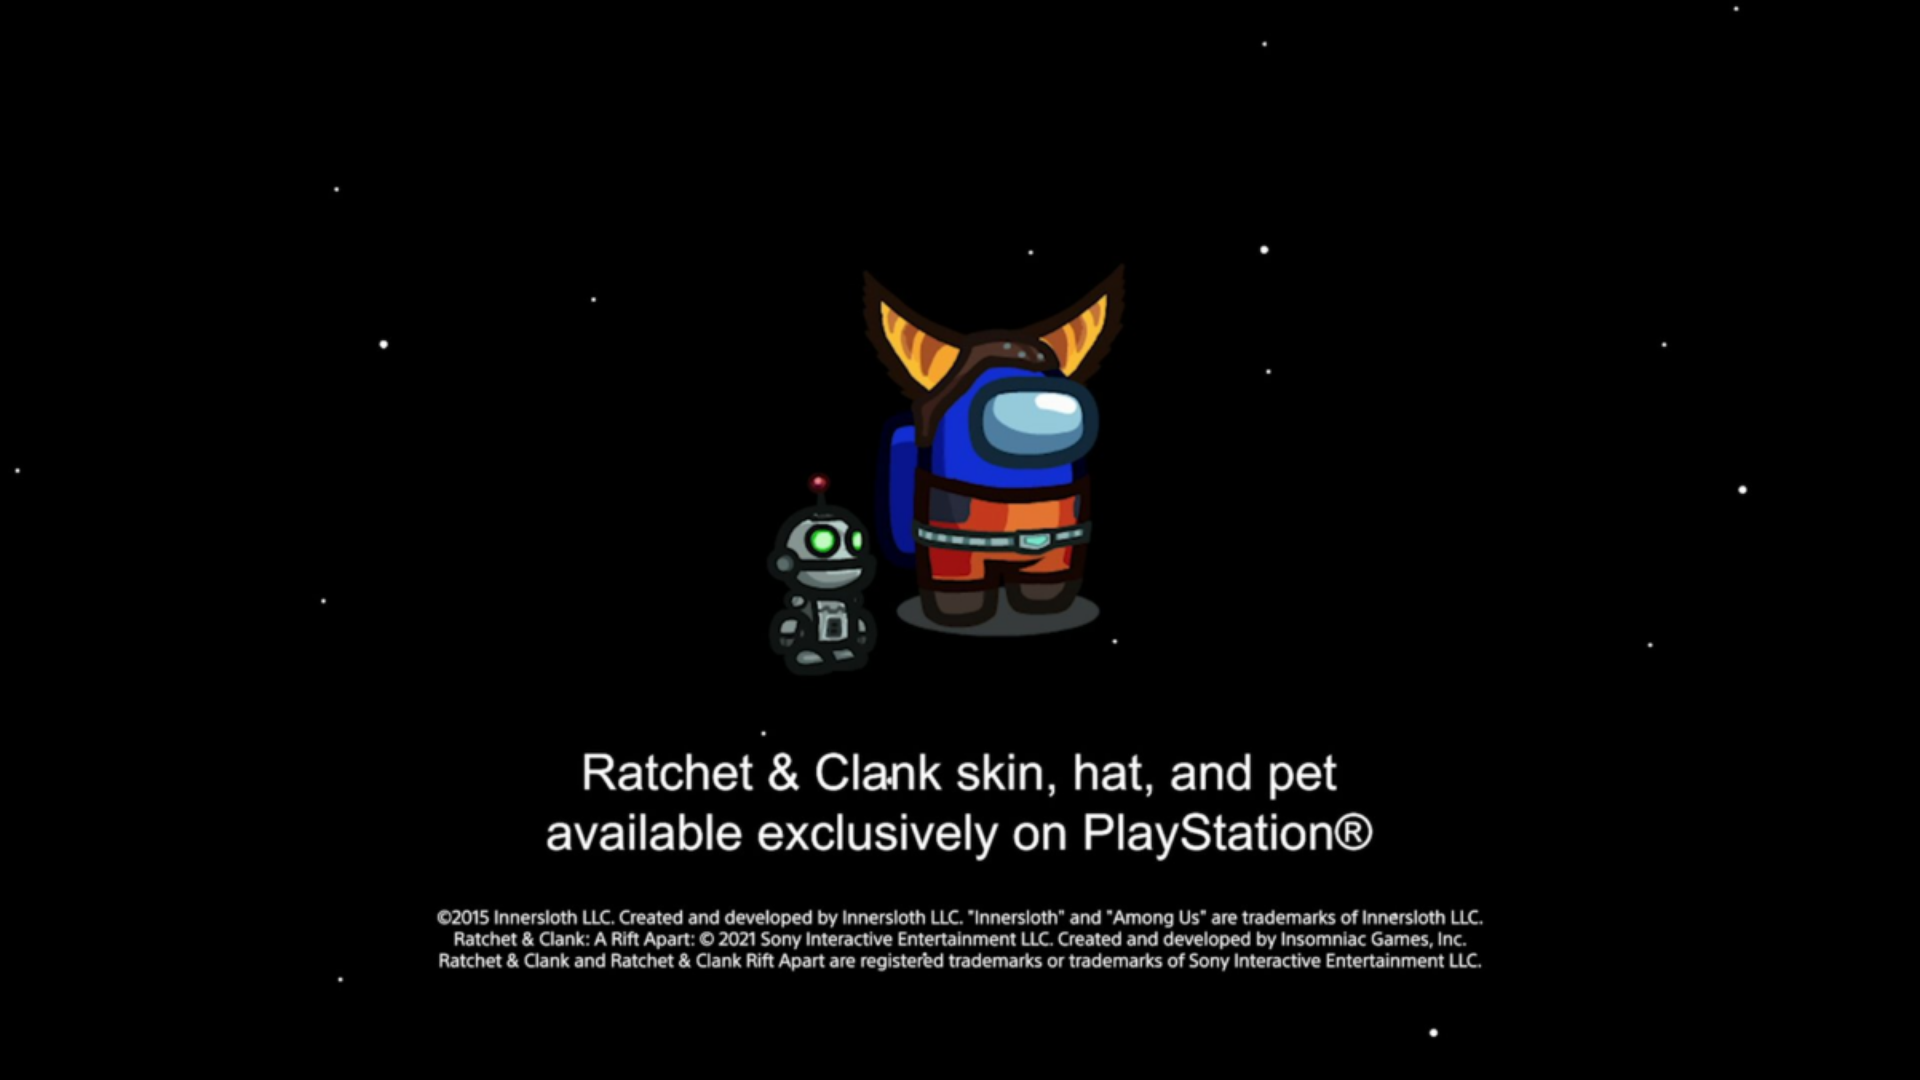 New Sony State of Play will focus on new Ratchet & Clank PS5 exclusive